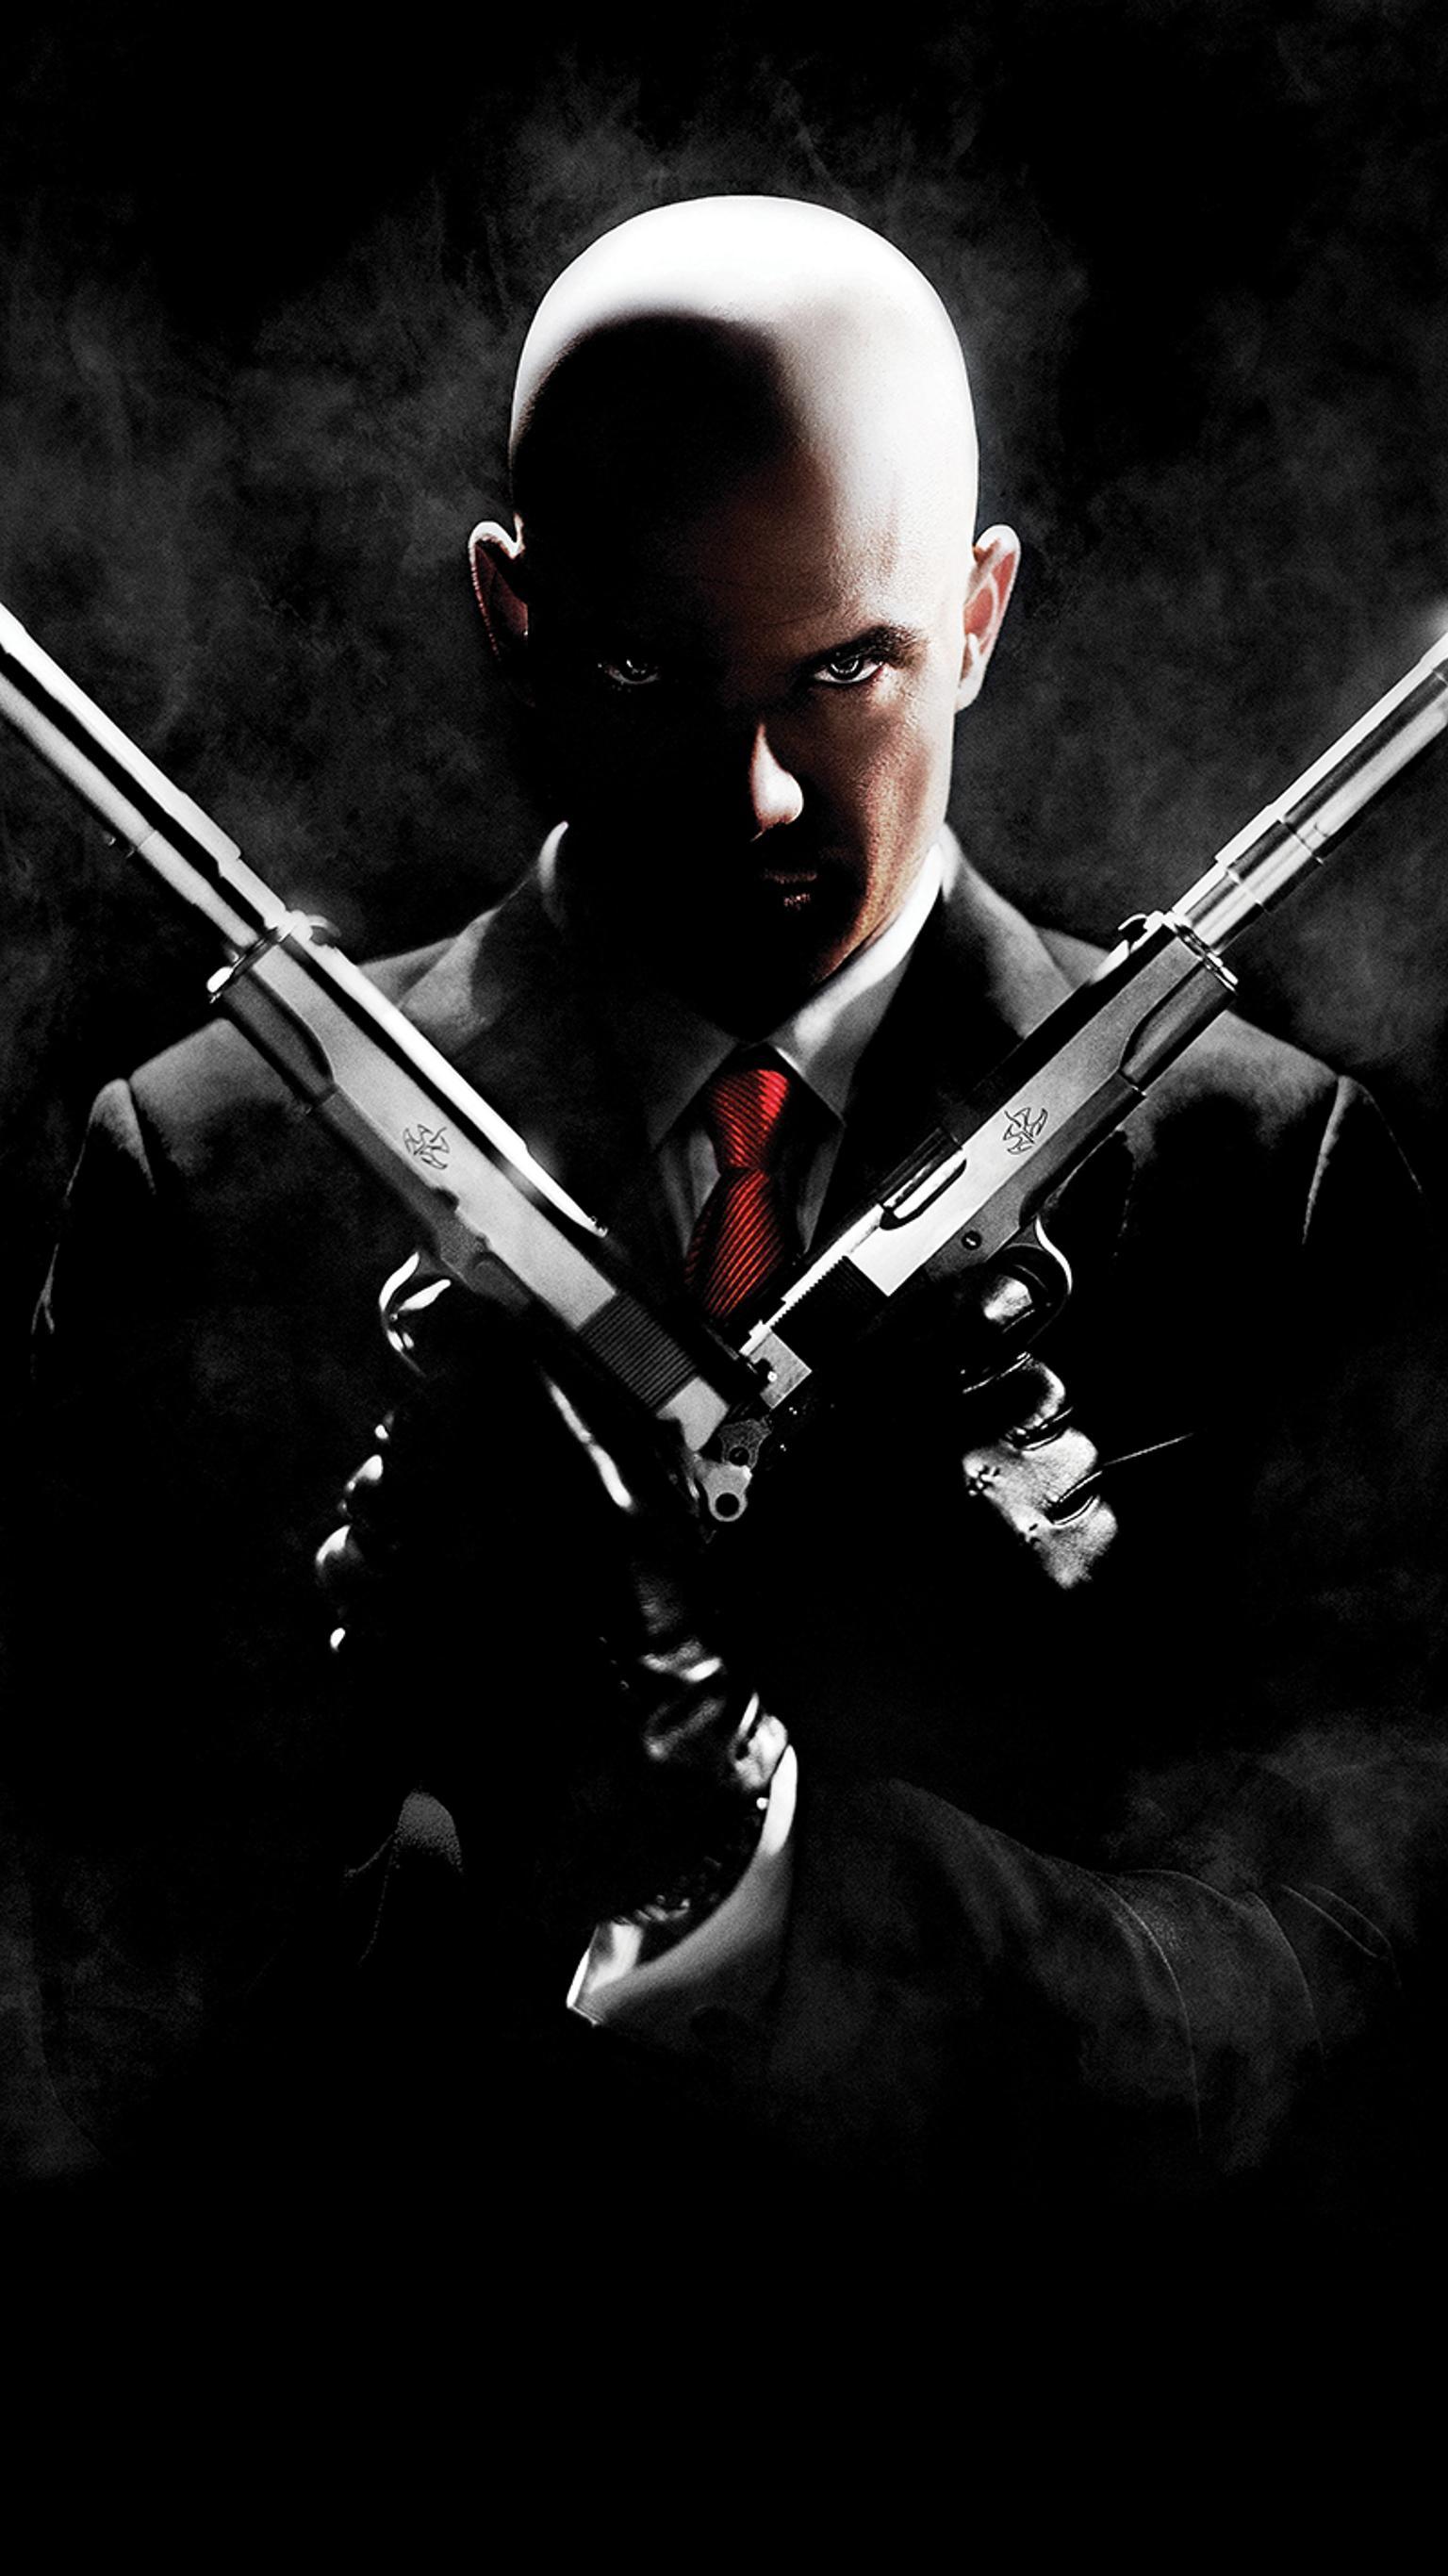 Some early hitman 3 wallpapers for mobile :) : r/HiTMAN